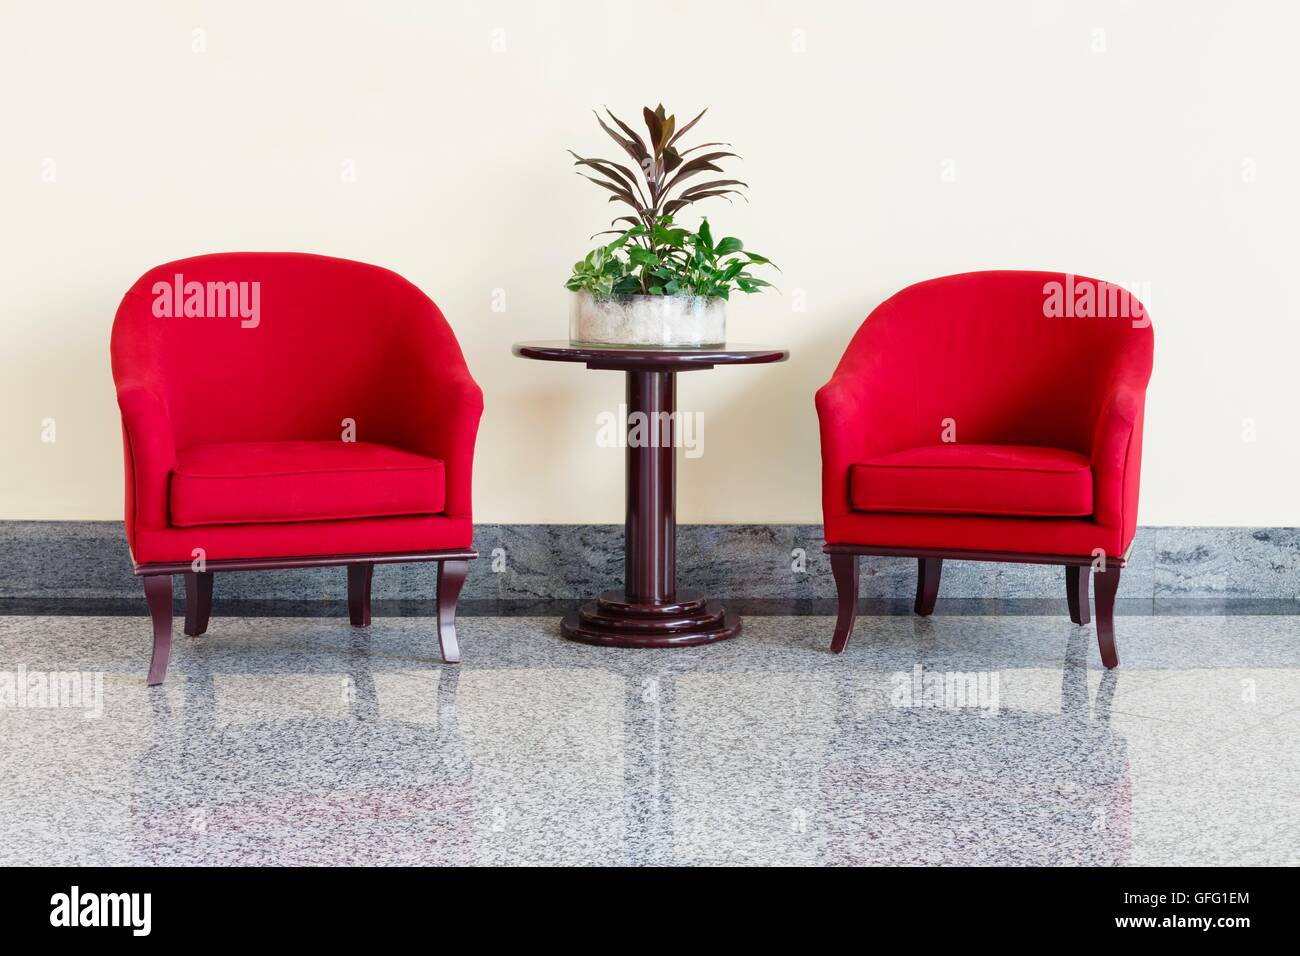 Modern red armchairs and table in a foyer Stock Photo